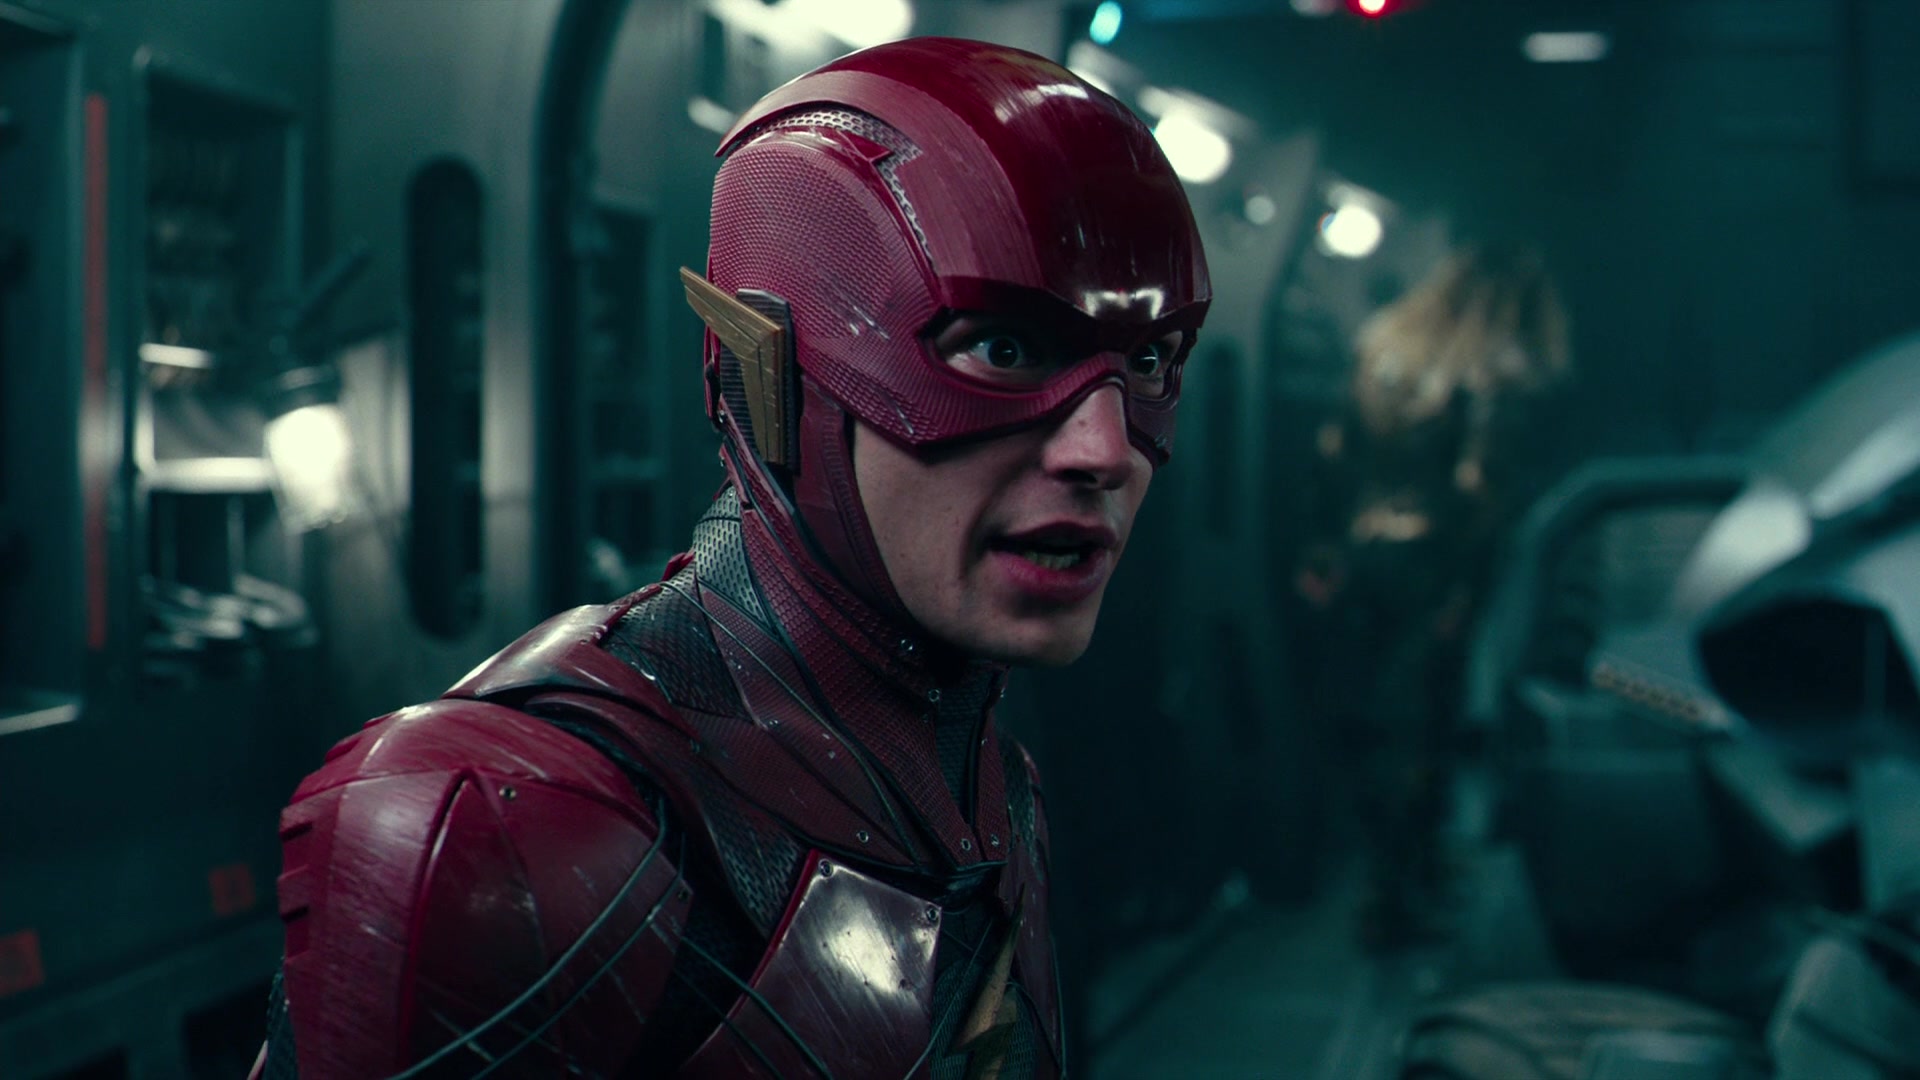 The Flash (Ezra Miller) asks the team for advice in Zack Snyder's Justice League (2021), Warner Bros. Entertainment